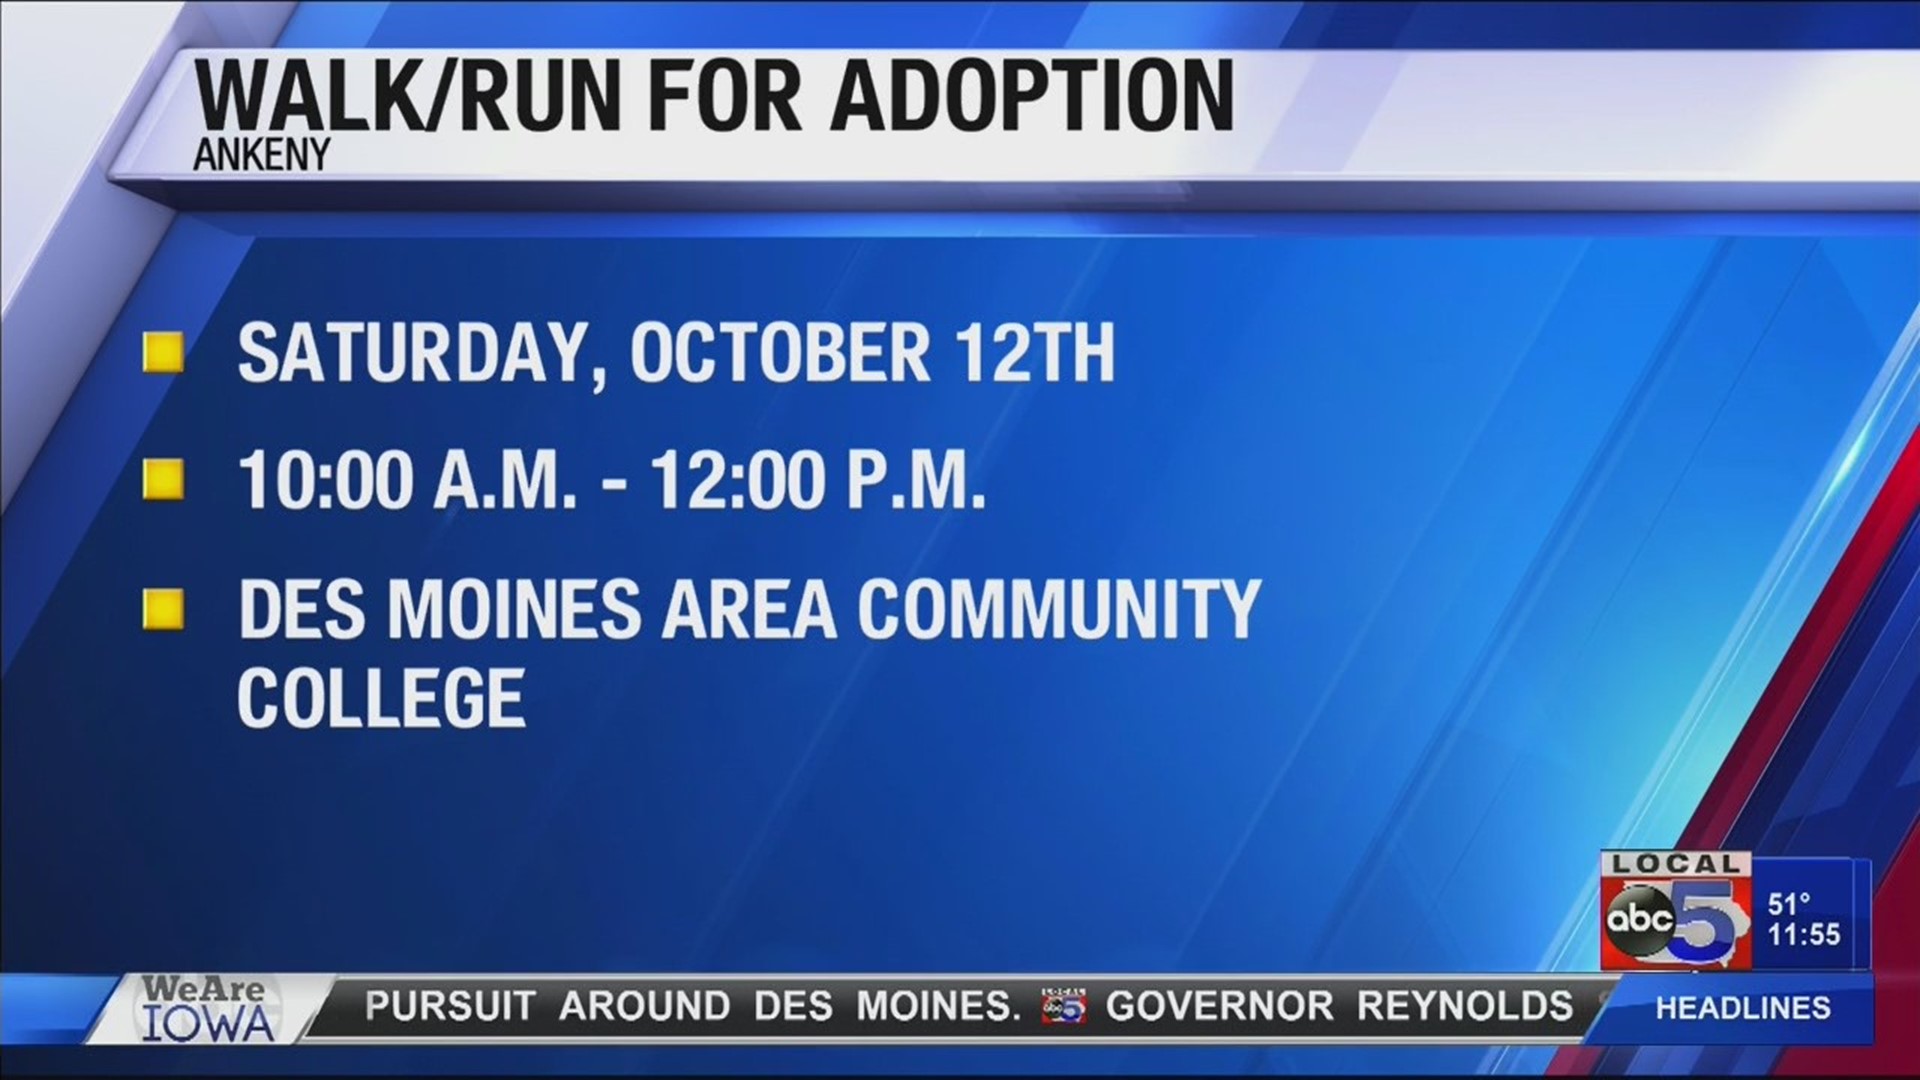 Walk/Run for Adoption is on Saturday, October 12th.